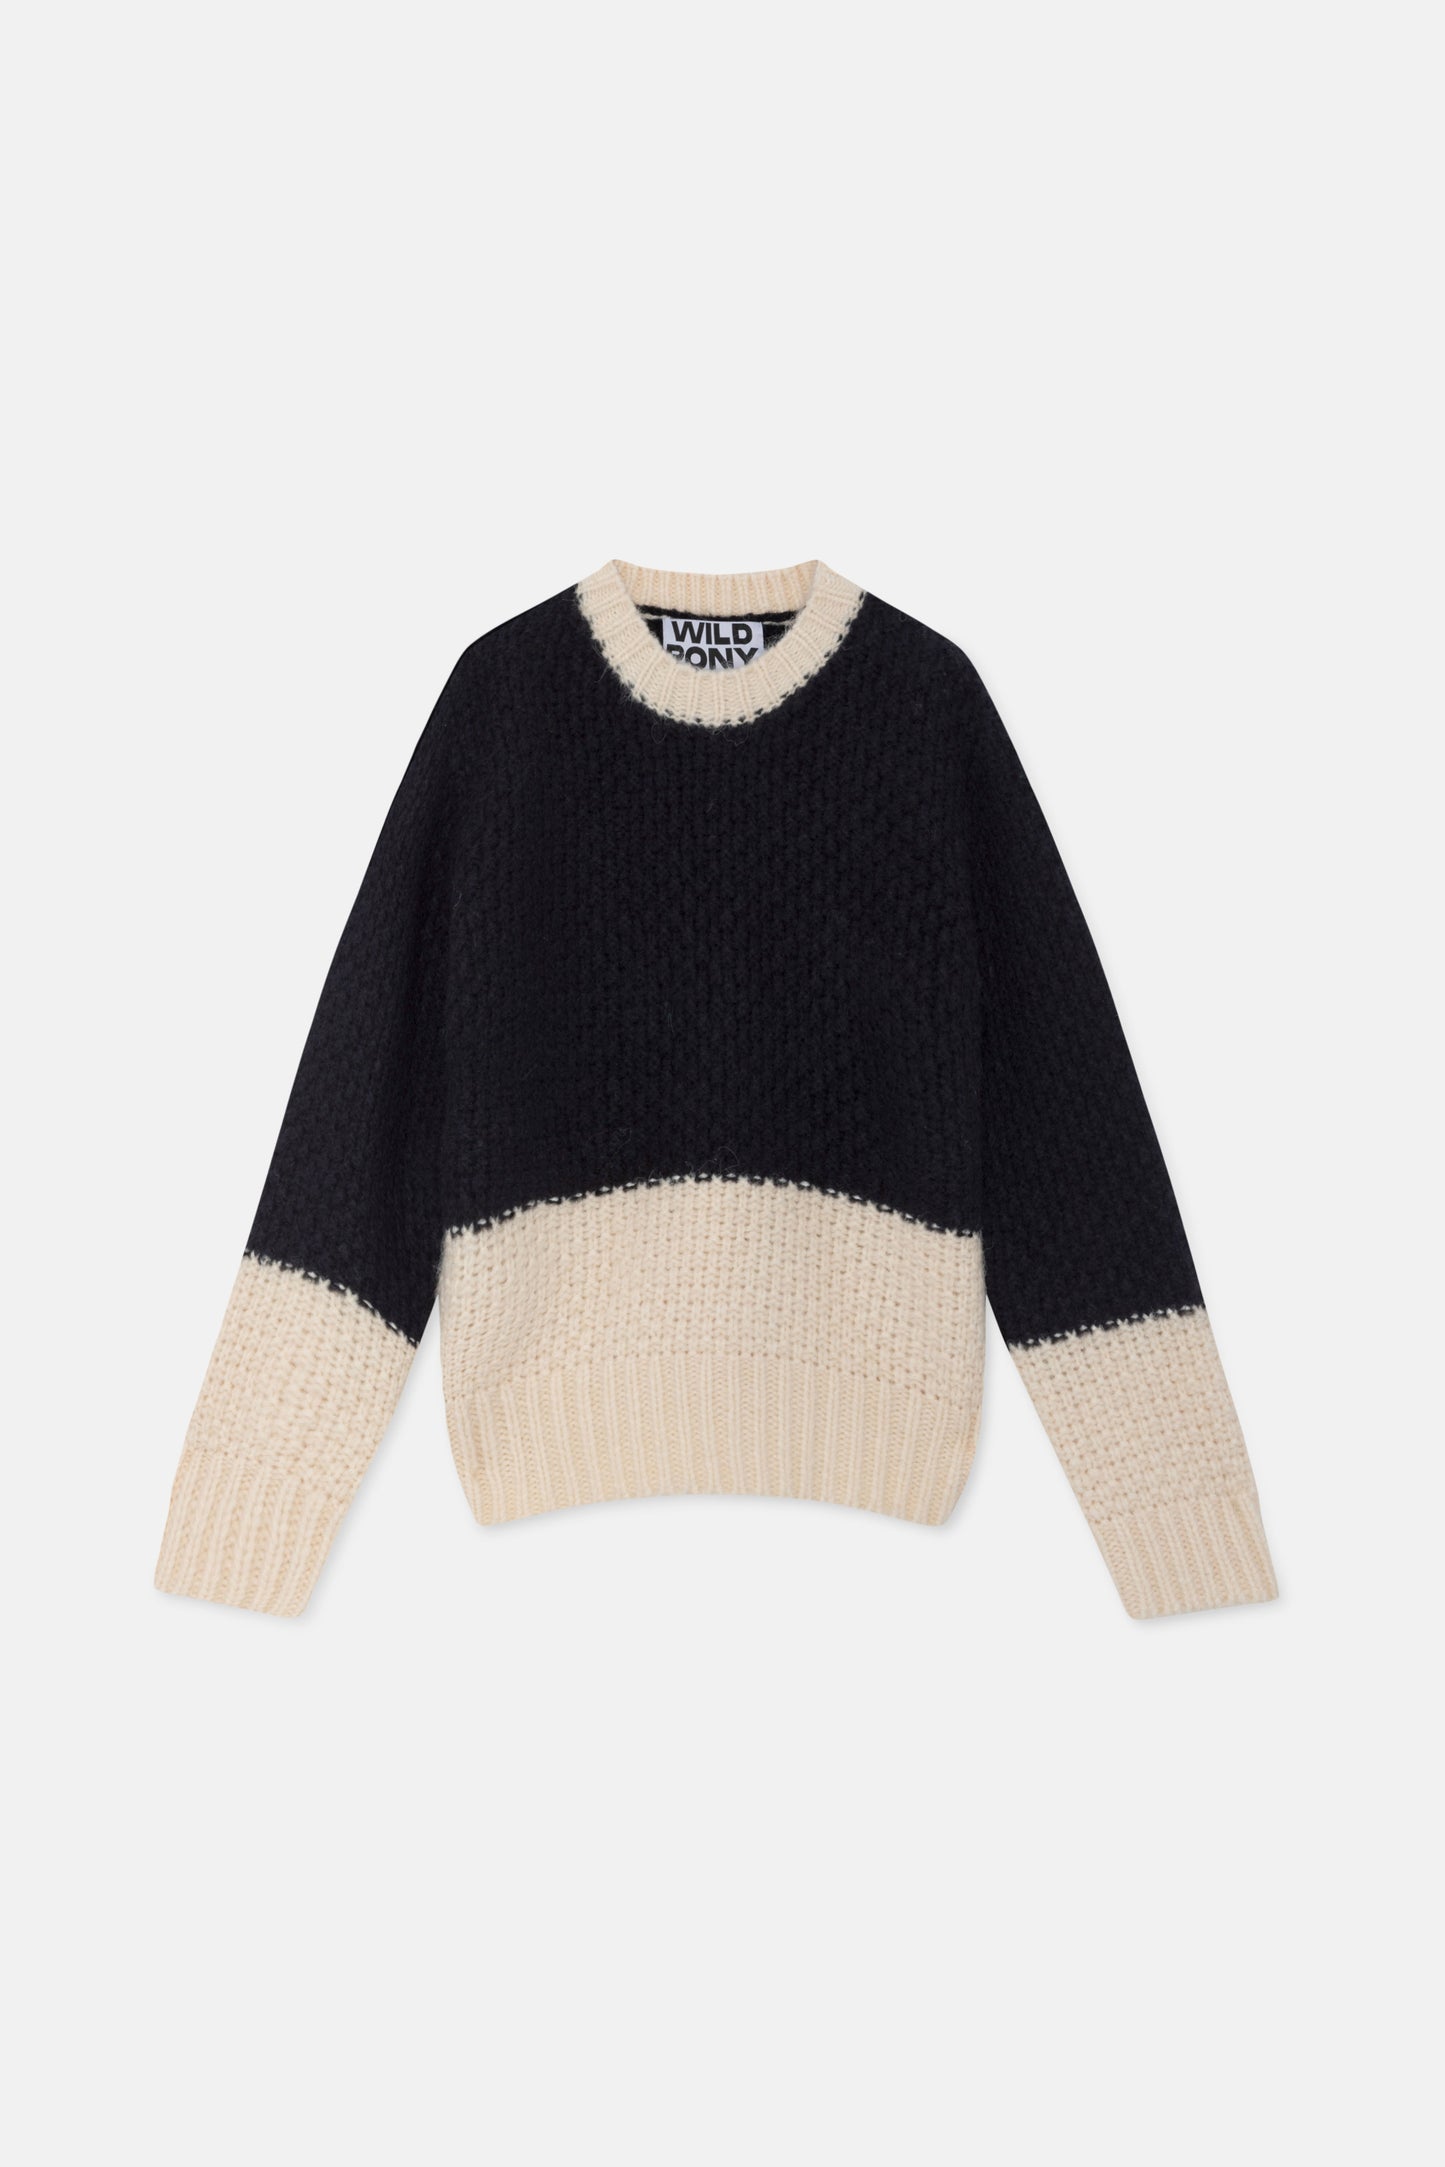 Black two-tone thick knit sweater